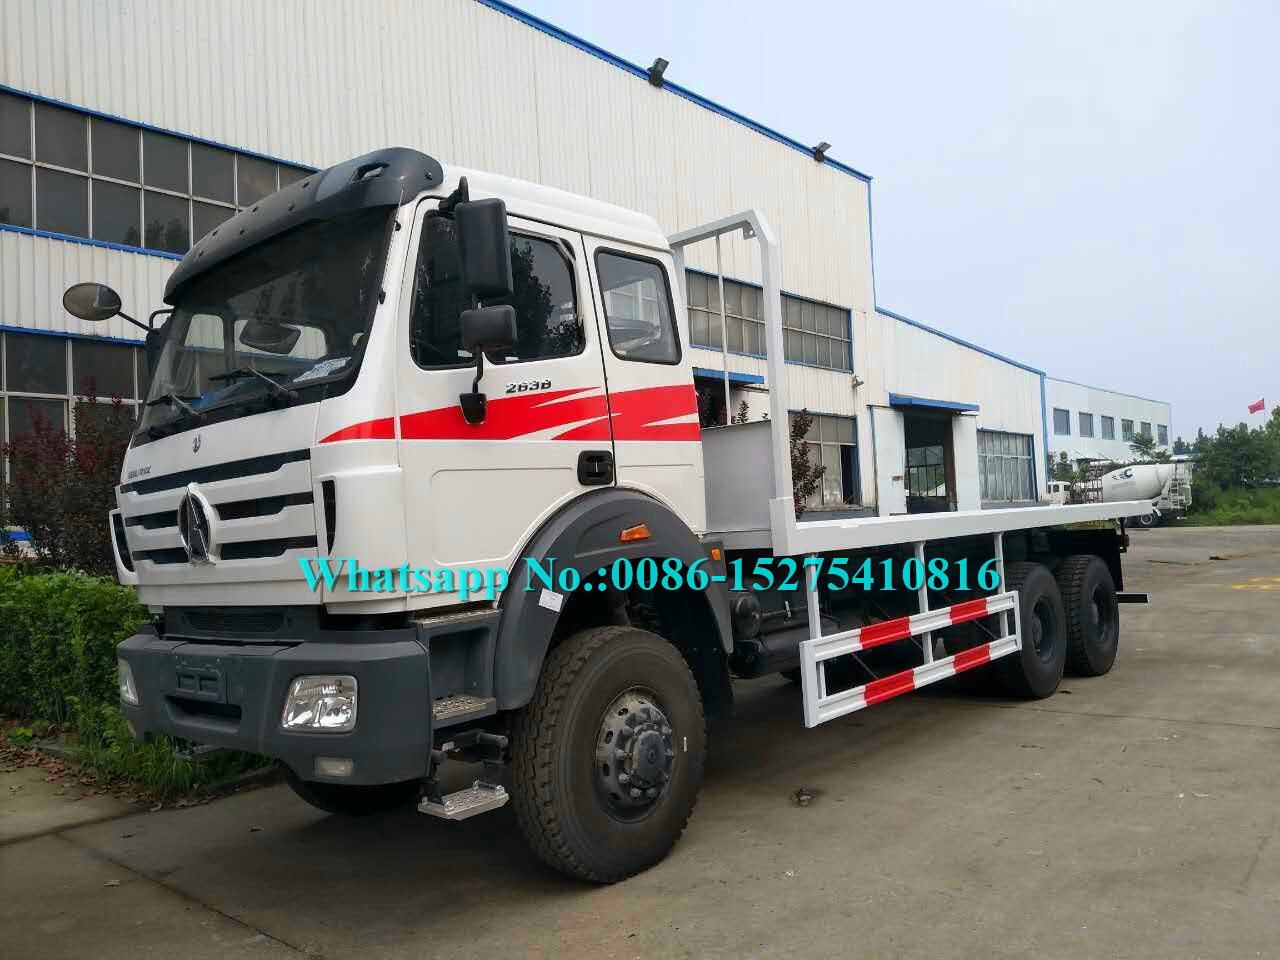 White color Beiben 6x6 2634PZ 30Ton 340hp 10 wheeler Cross country Container Flat Bed Truck for DR CONGO